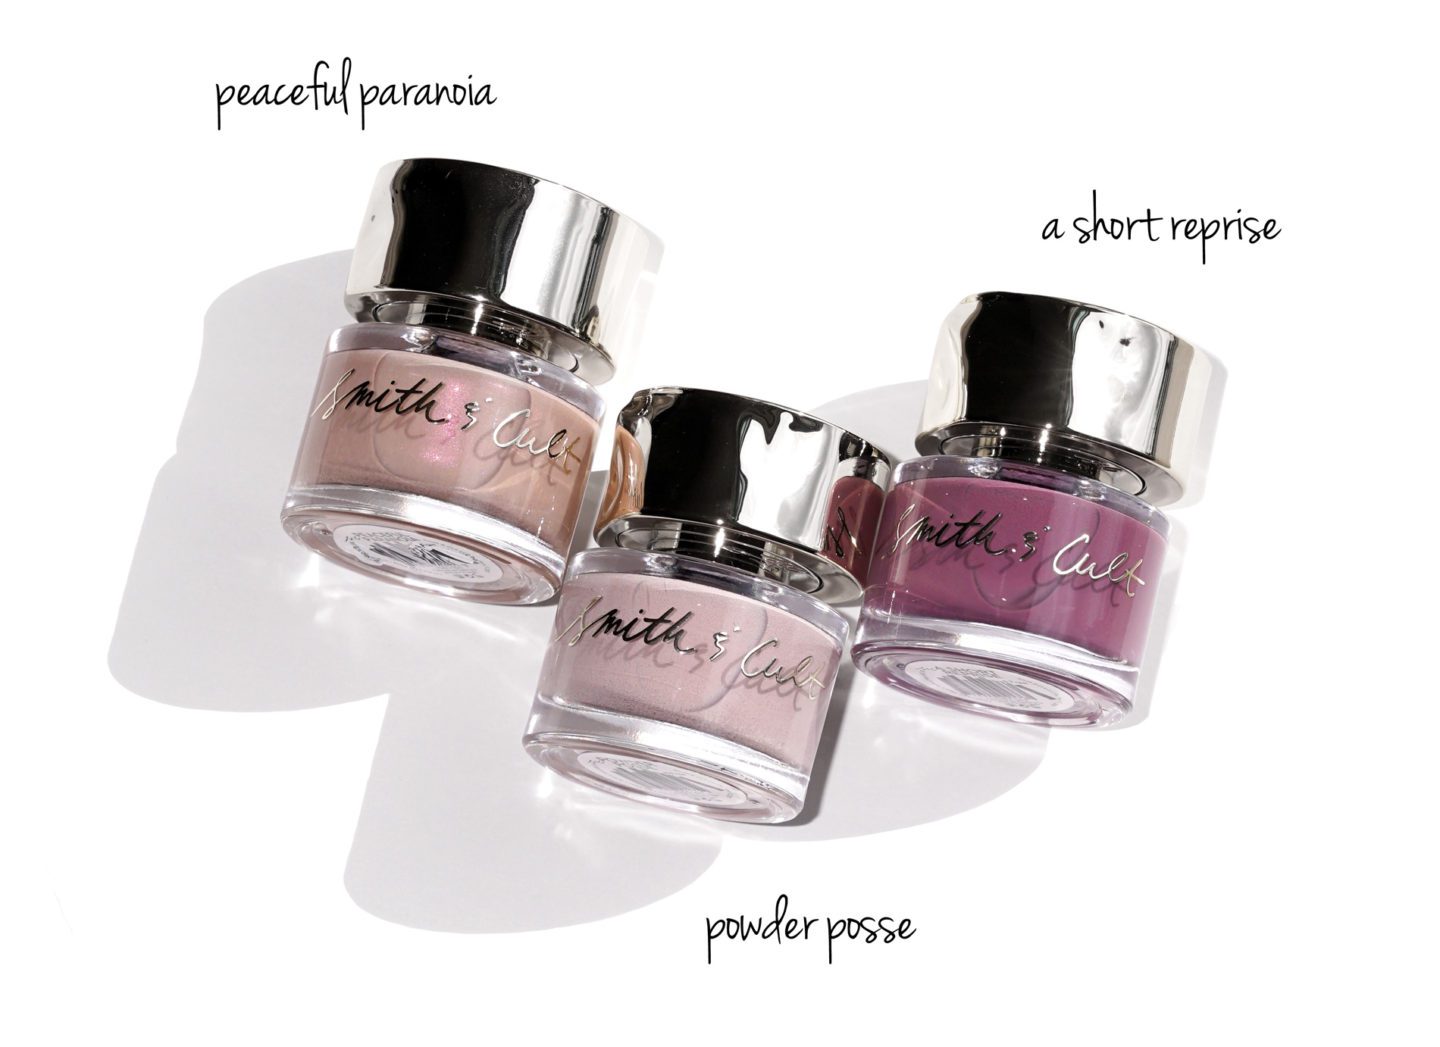 Smith and Cult Nail Polishes Peaceful Paranoia, Powder Posse, A Short Reprise swatches